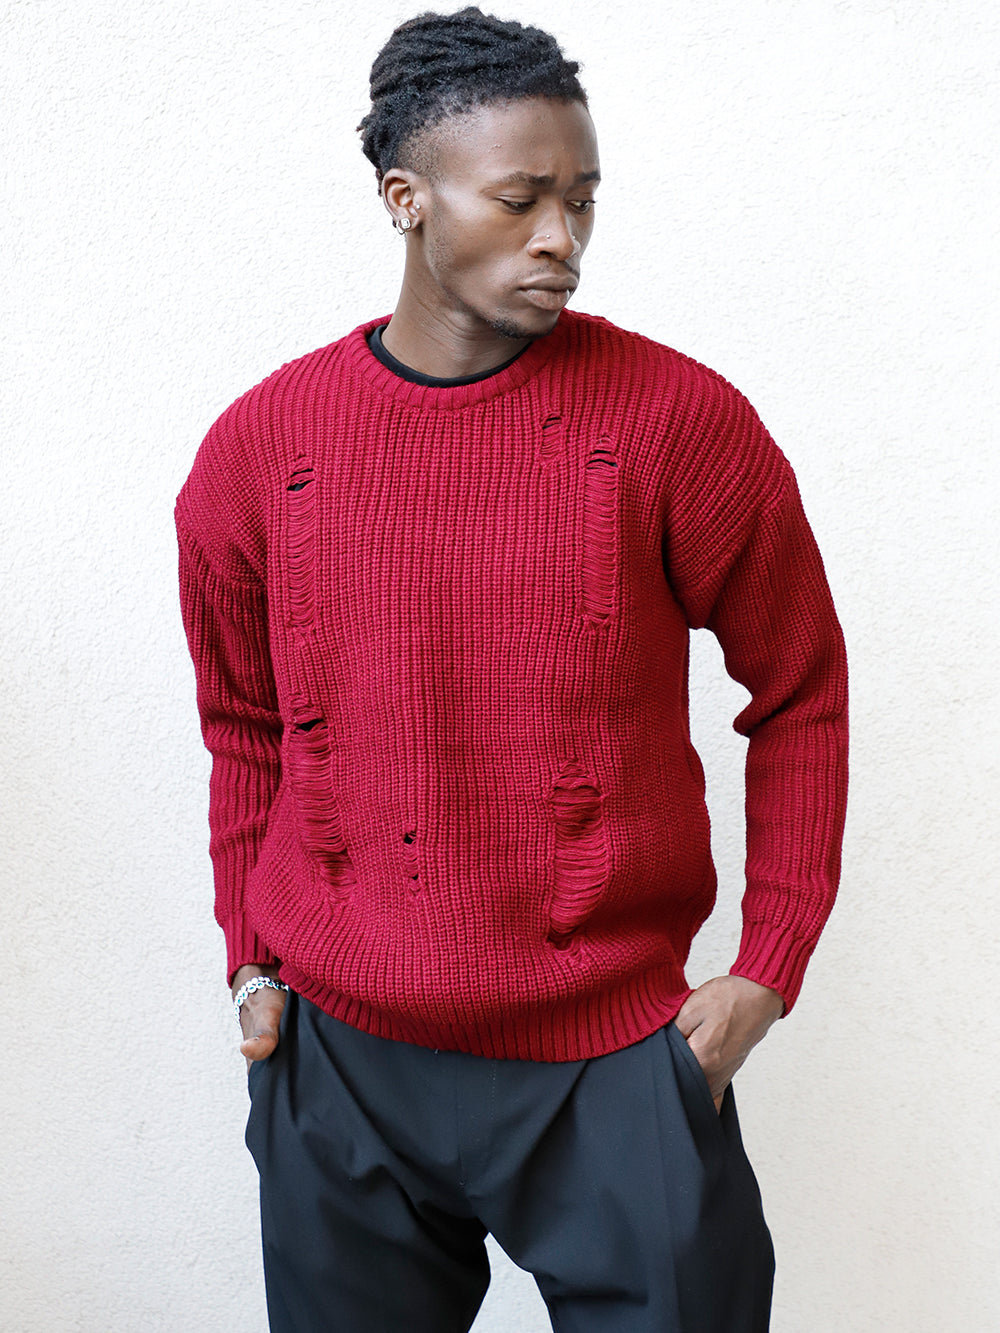 A fit man wearing a DISTRESSED GENTLEMAN SWEATER | BURGUNDY and black pants.